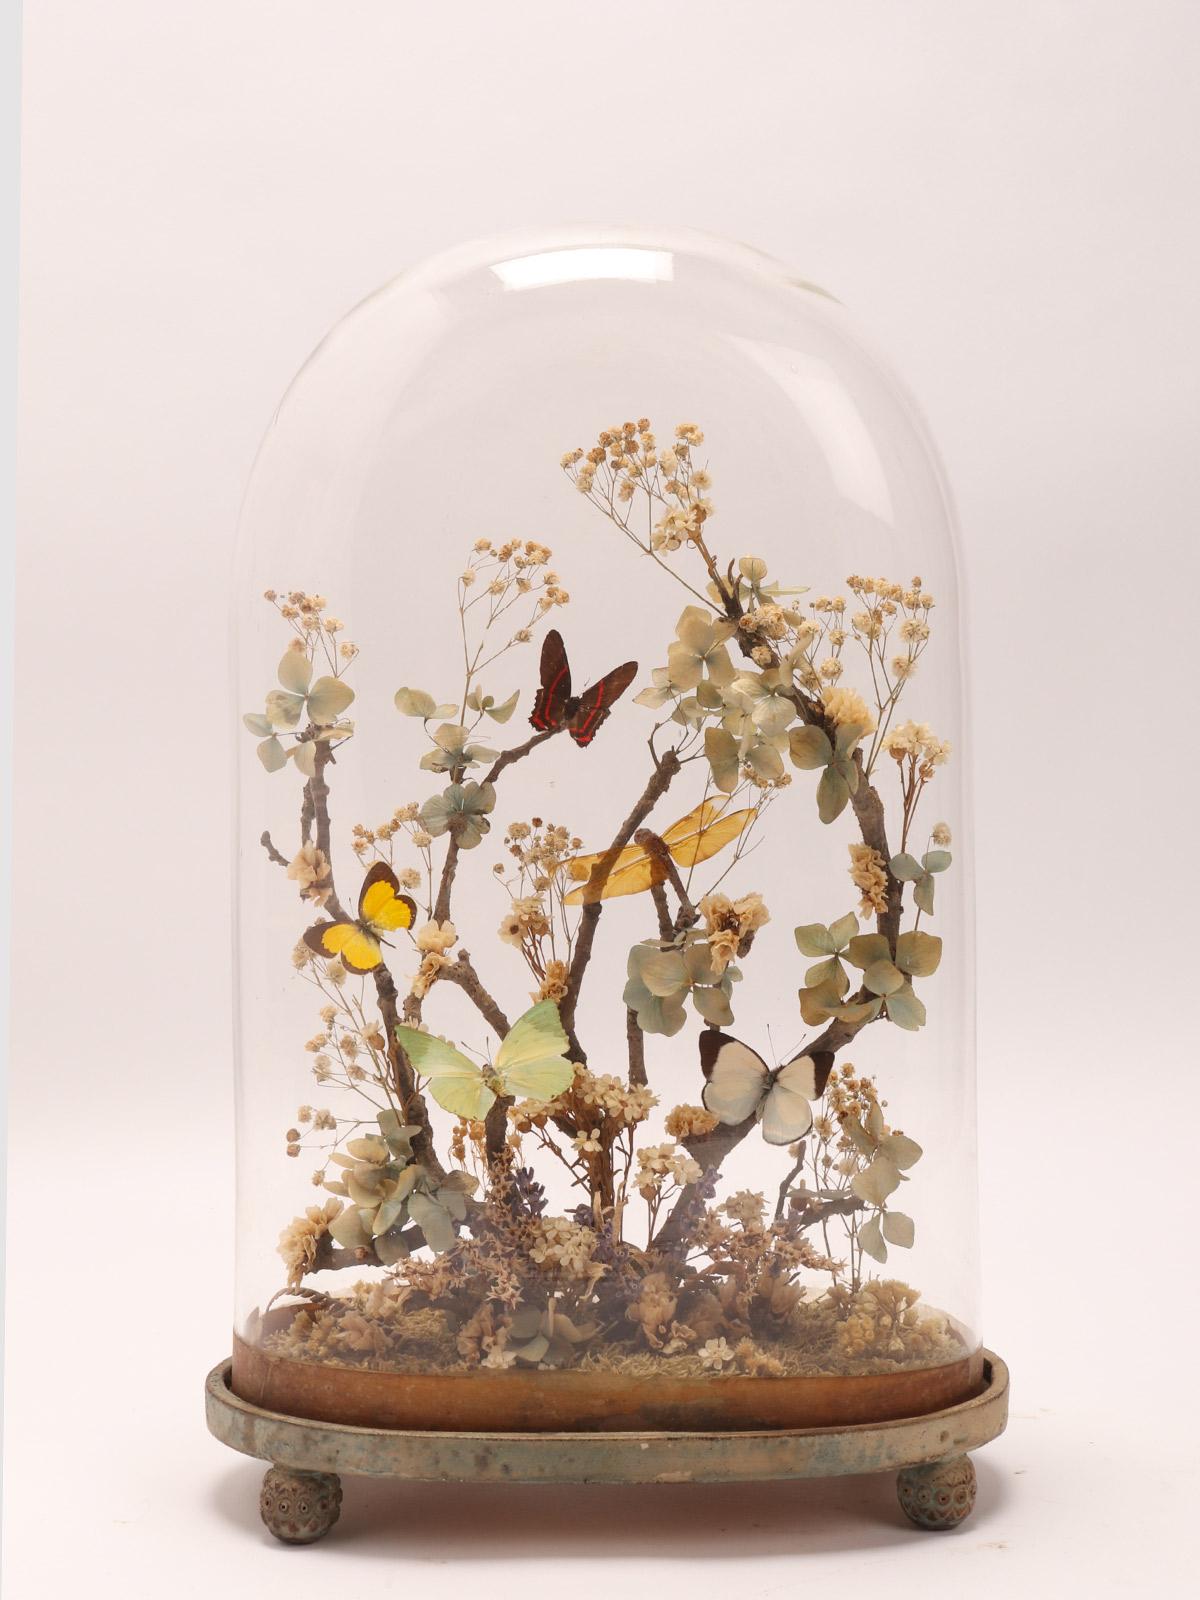 A diorama with natural Wunderkammer specimens of multicolored butterflies leaned over flowering tree branches willing over moss. The Specimens are mounted inside an oval glass dome, over a painted wooden base. Italy, circa 1870.